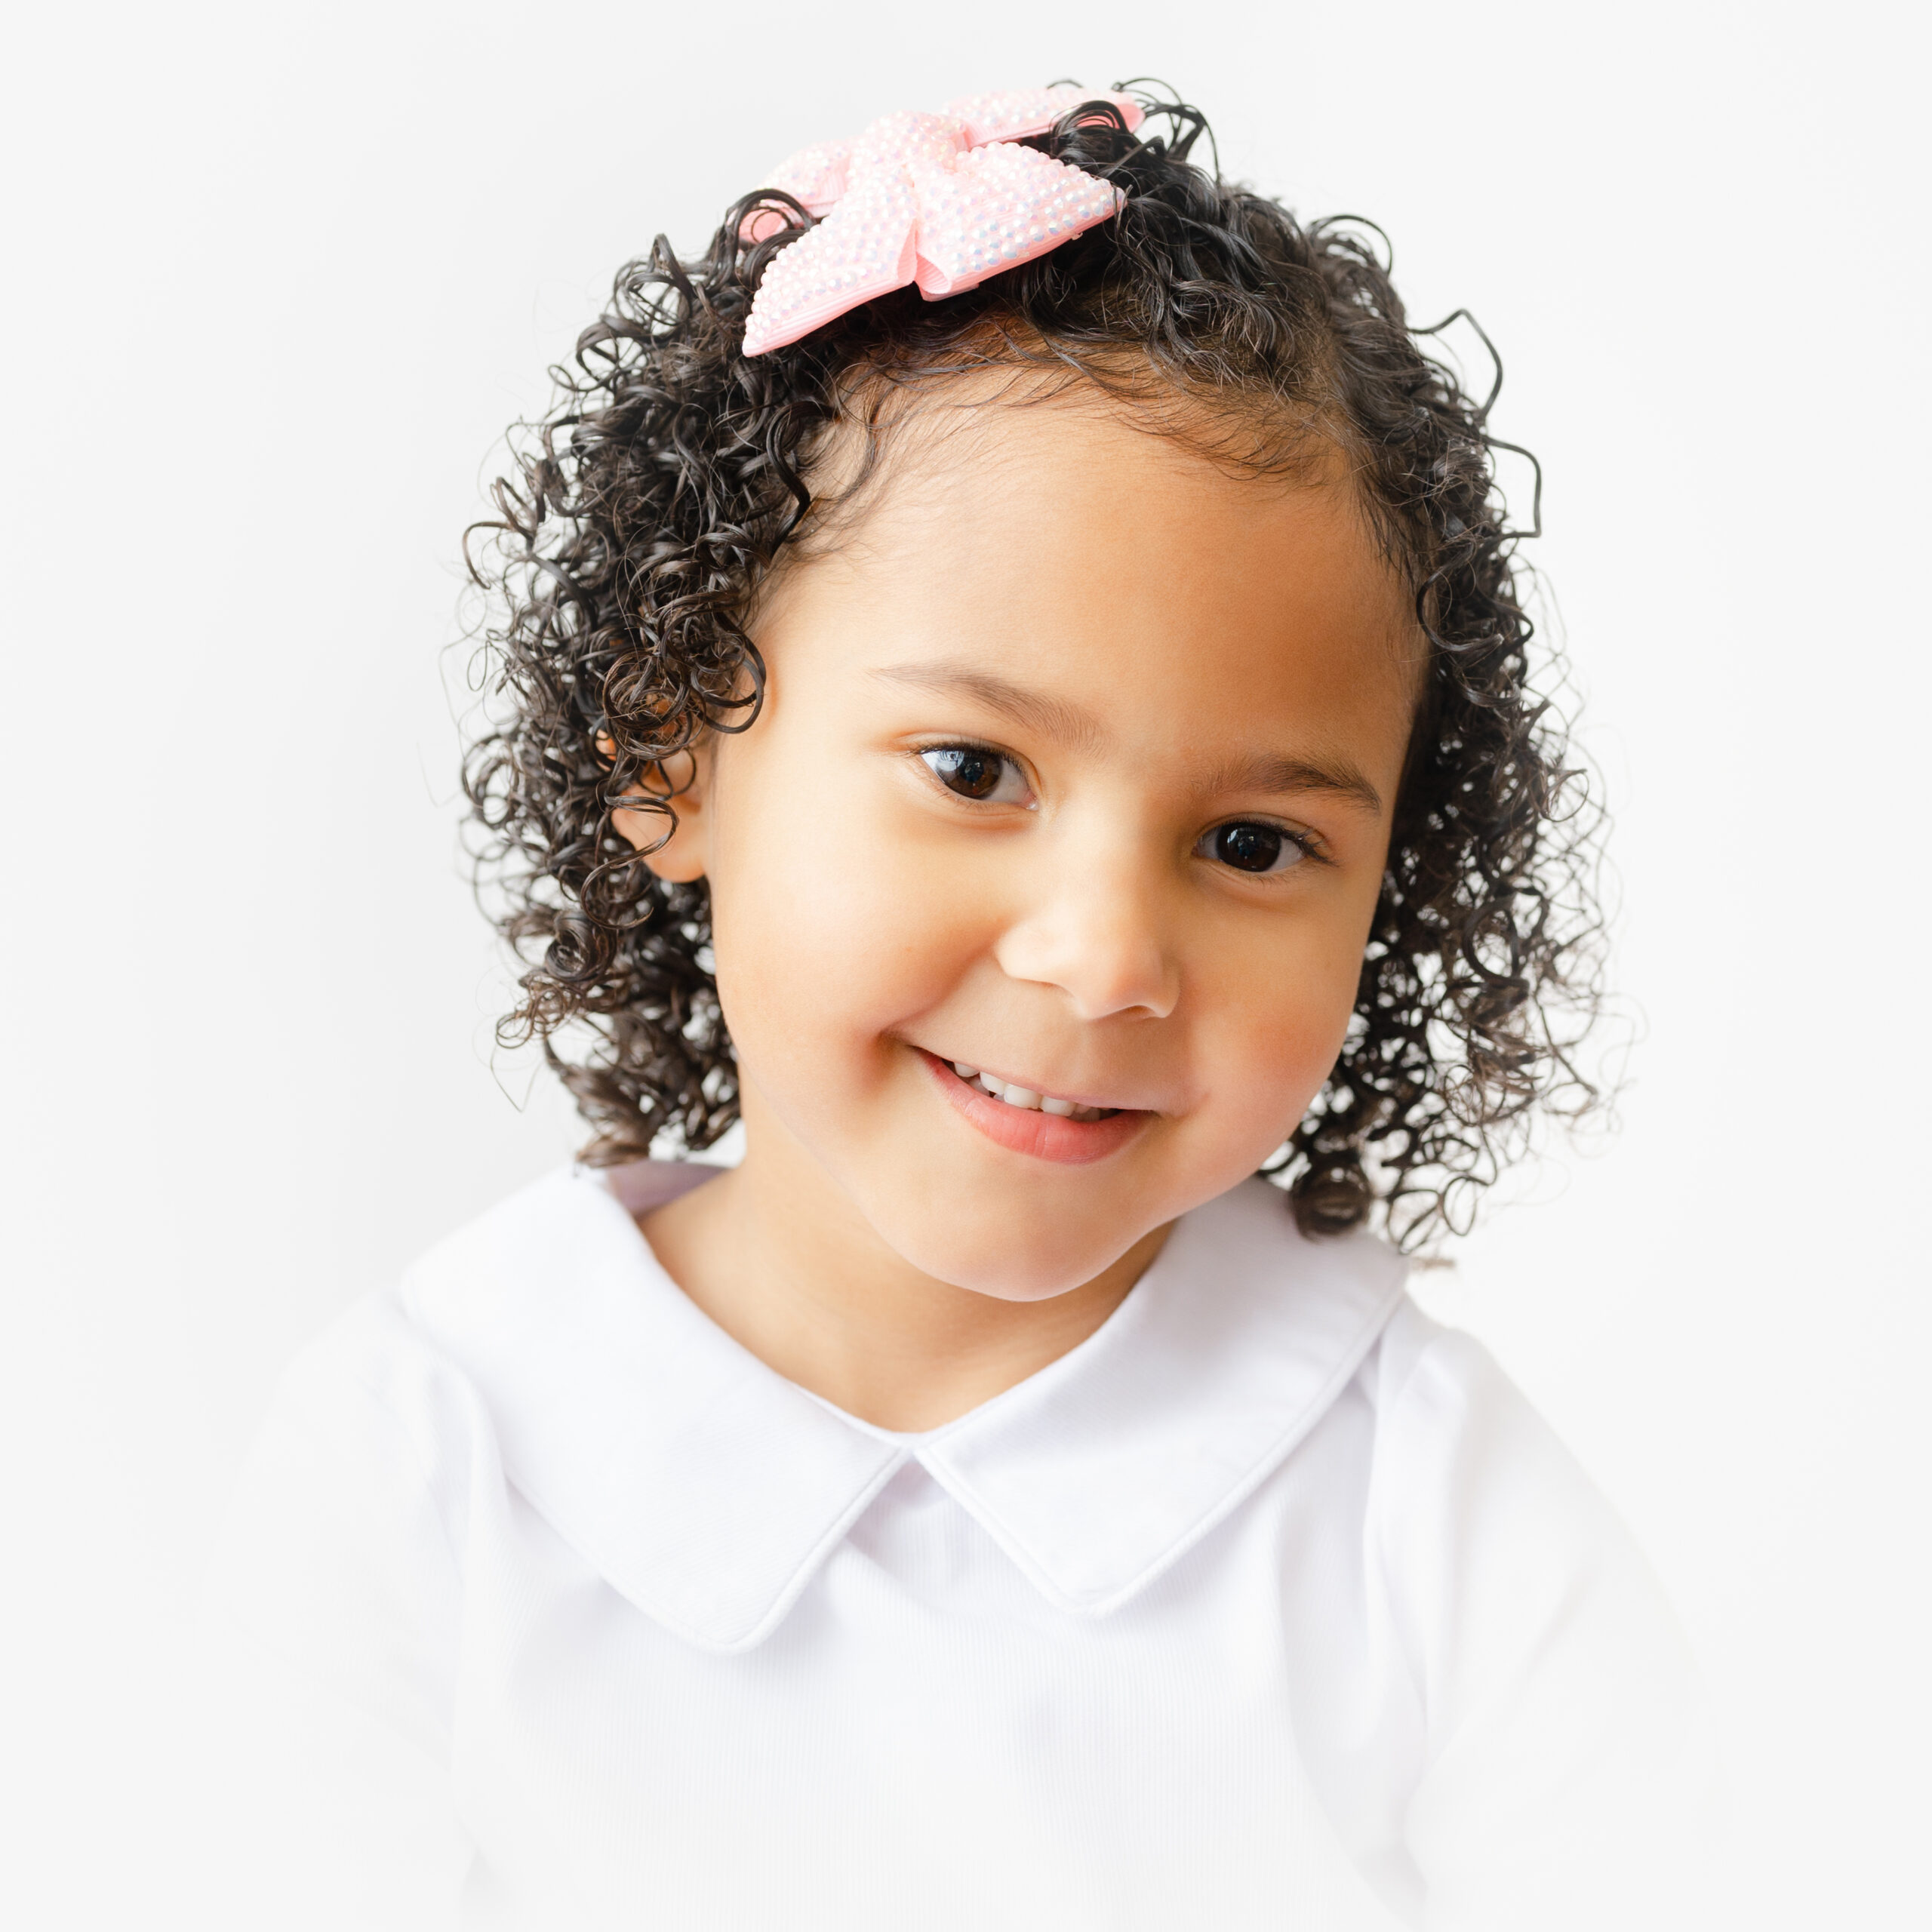 Little girl with beautiful curls smiles during her photo session.